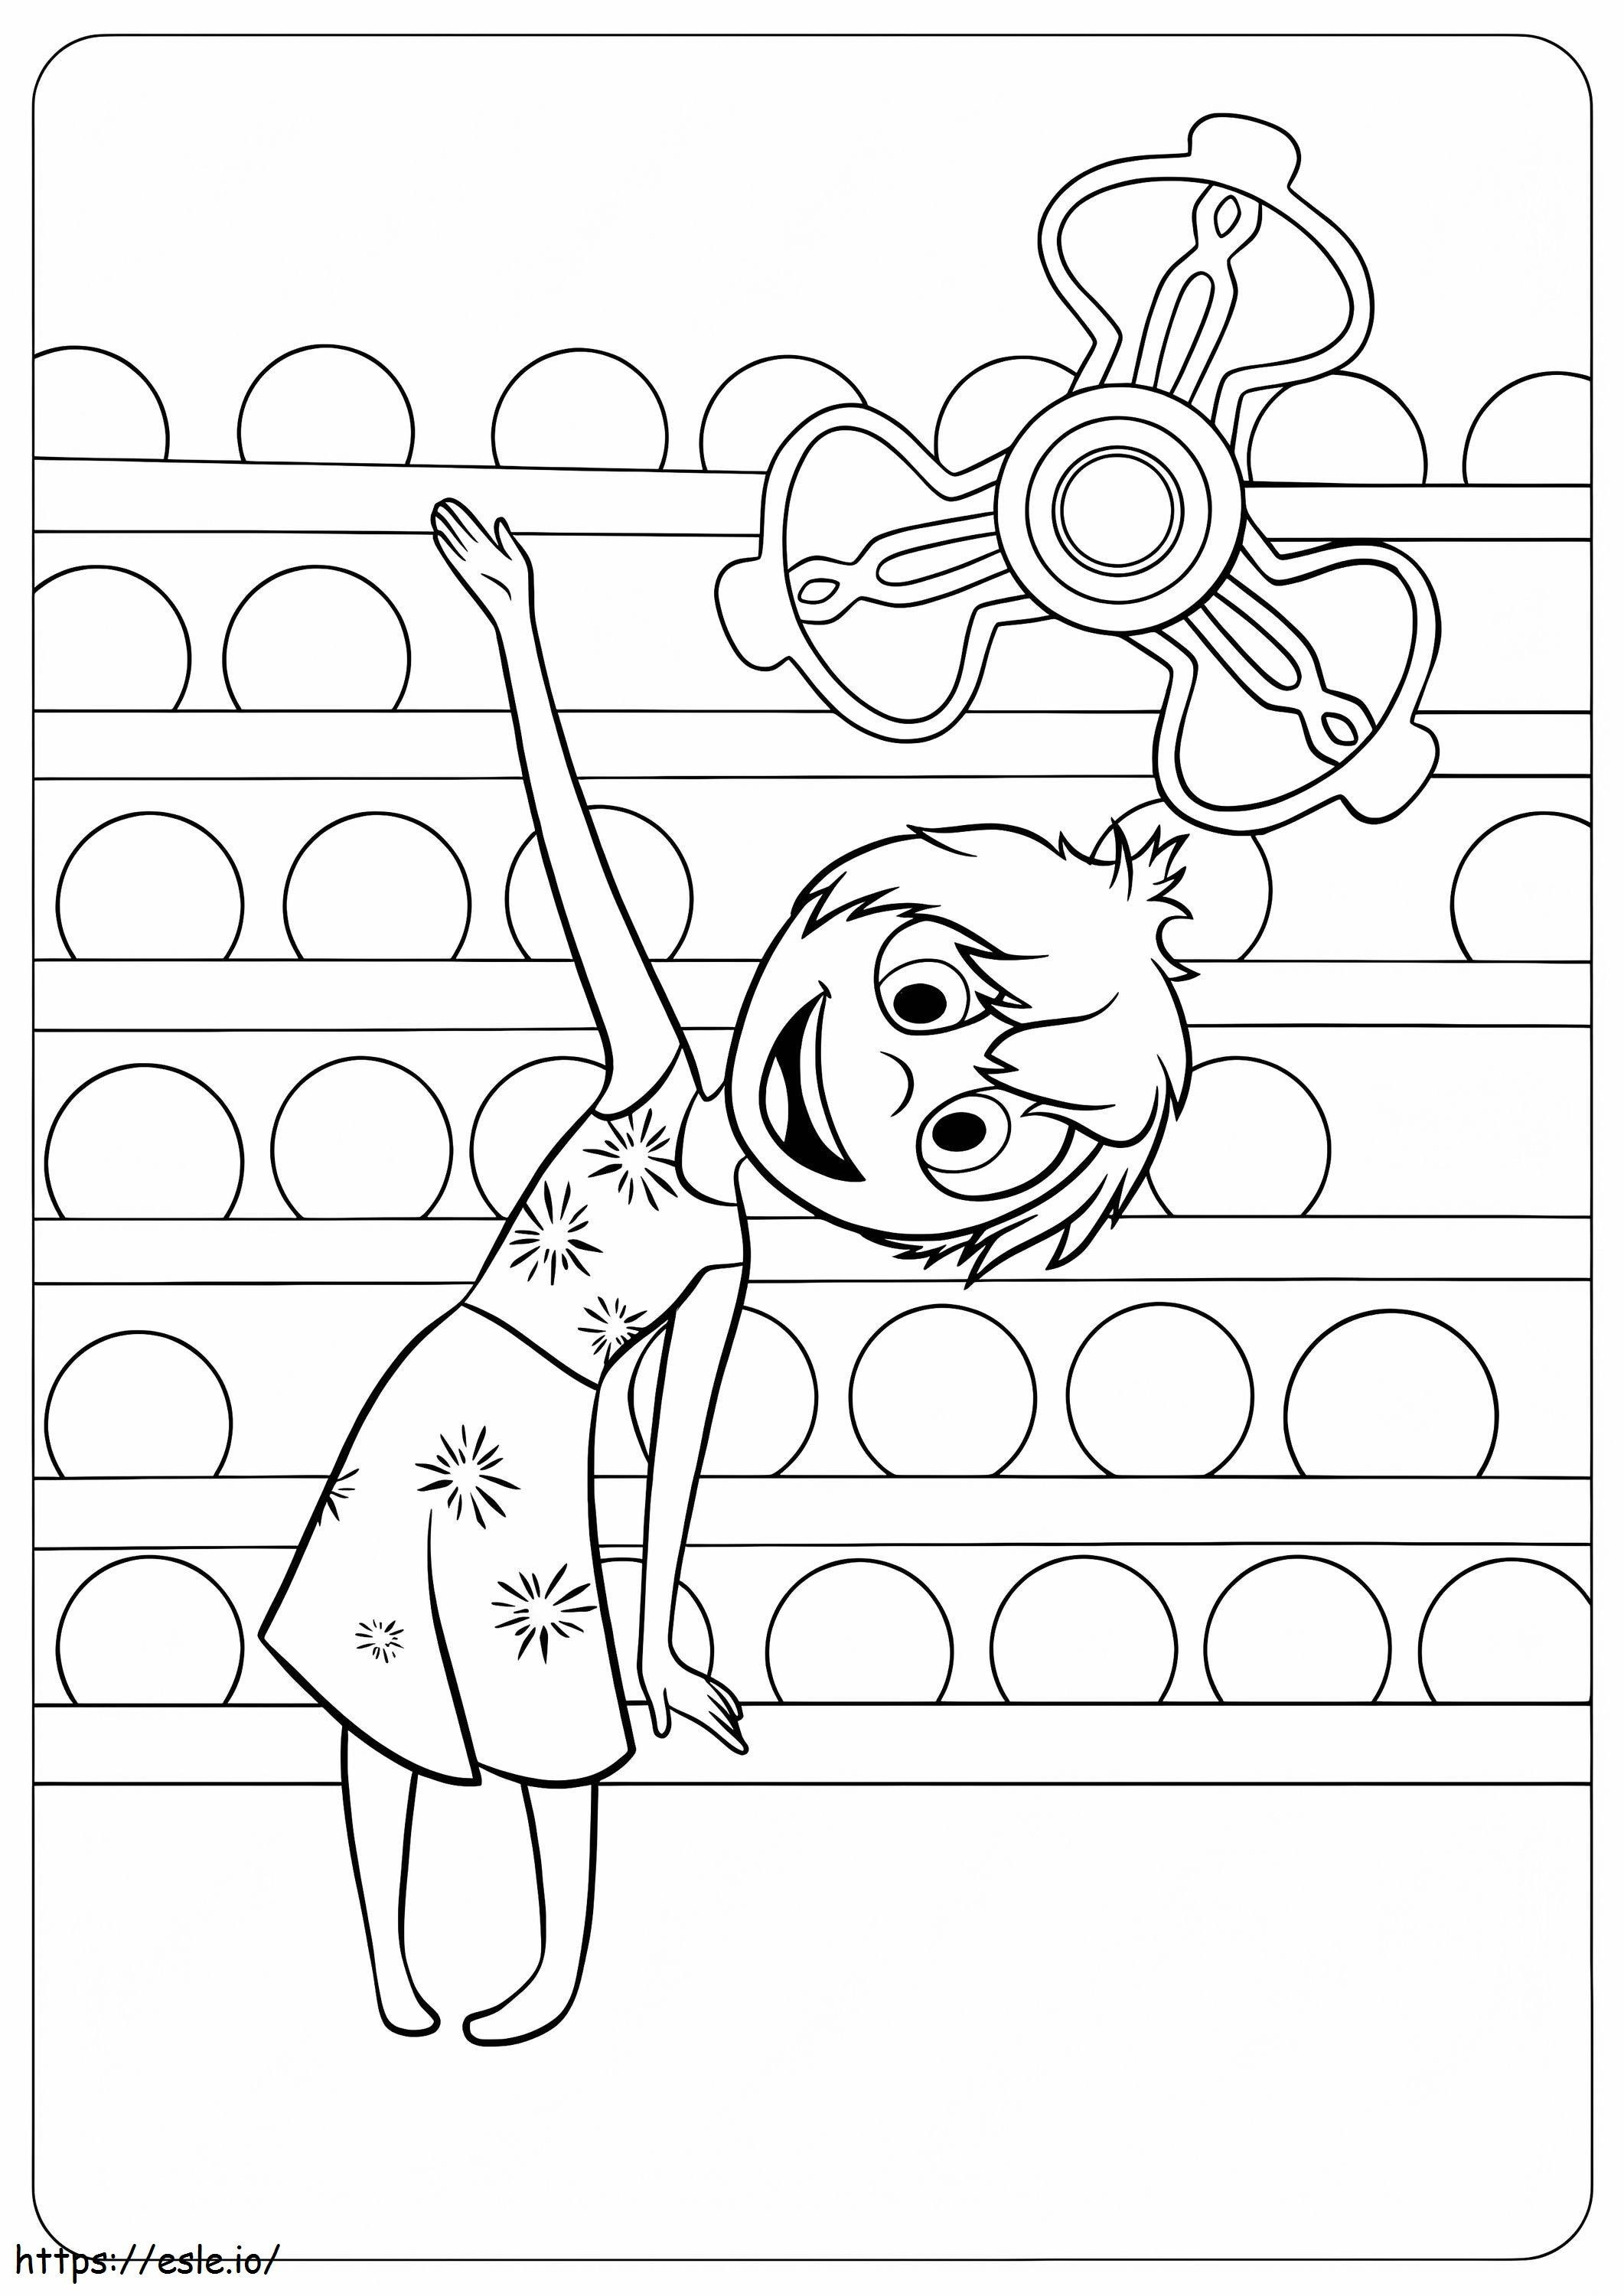 Joy Inside Out 1 coloring page